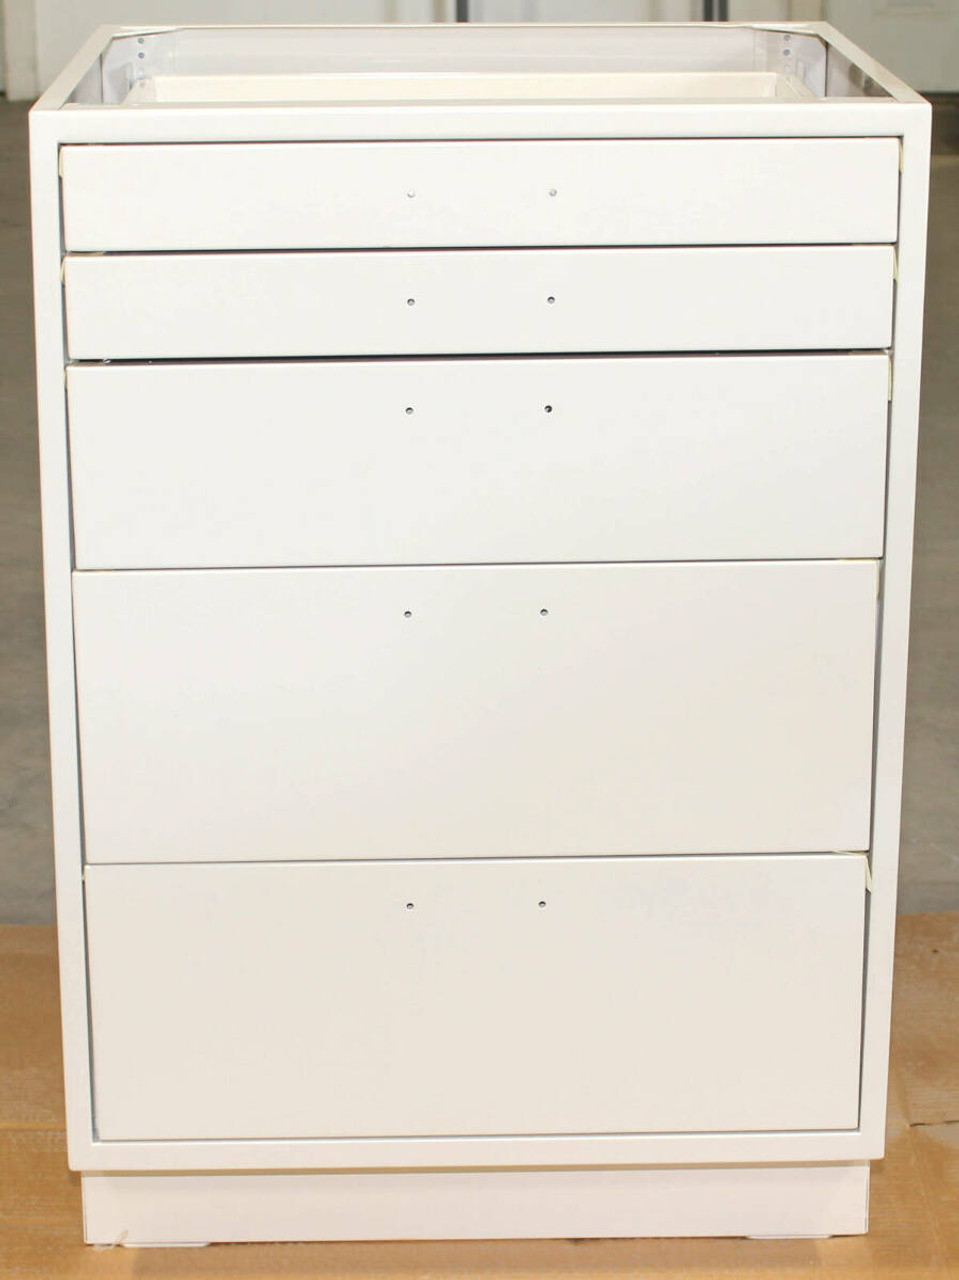 ICI Quick Ship CPJTP820-24 Suspended Cabinet 5 Drawer, 24 Inches Wide x 35-1/2 Inches Tall x 22 Deep, ICI Number: 163S4320.